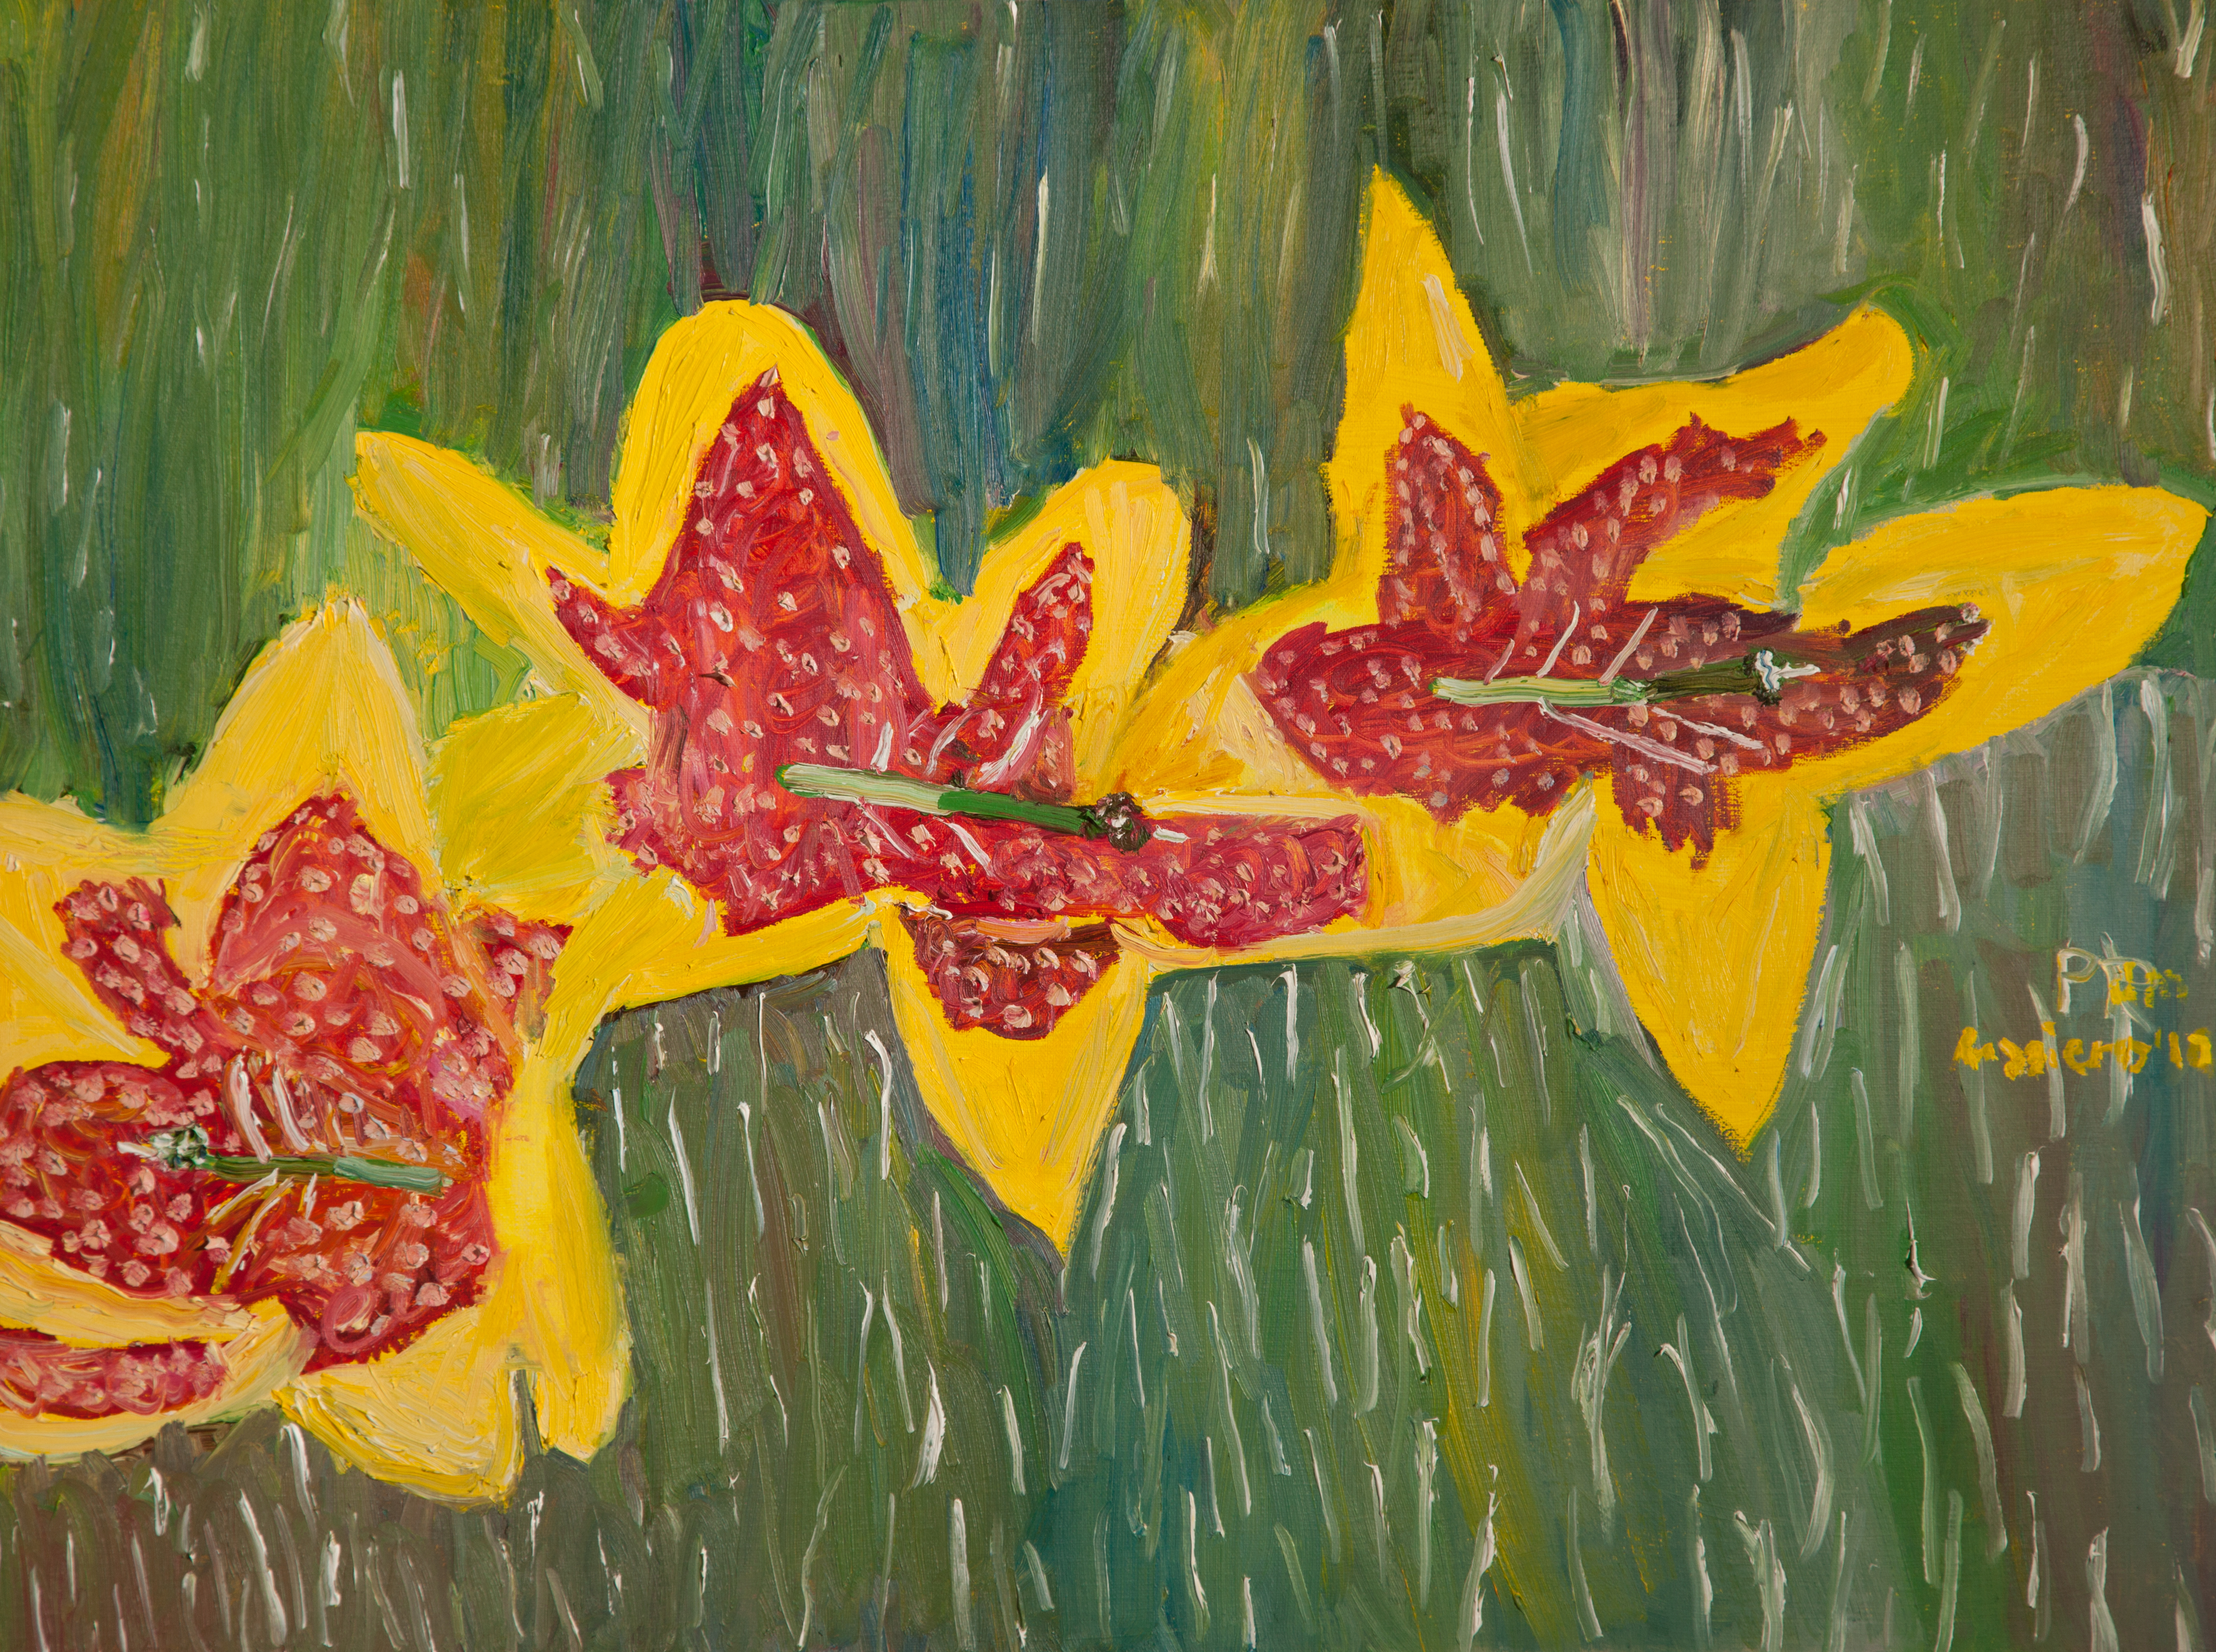 "Red And Yellow Flowers"